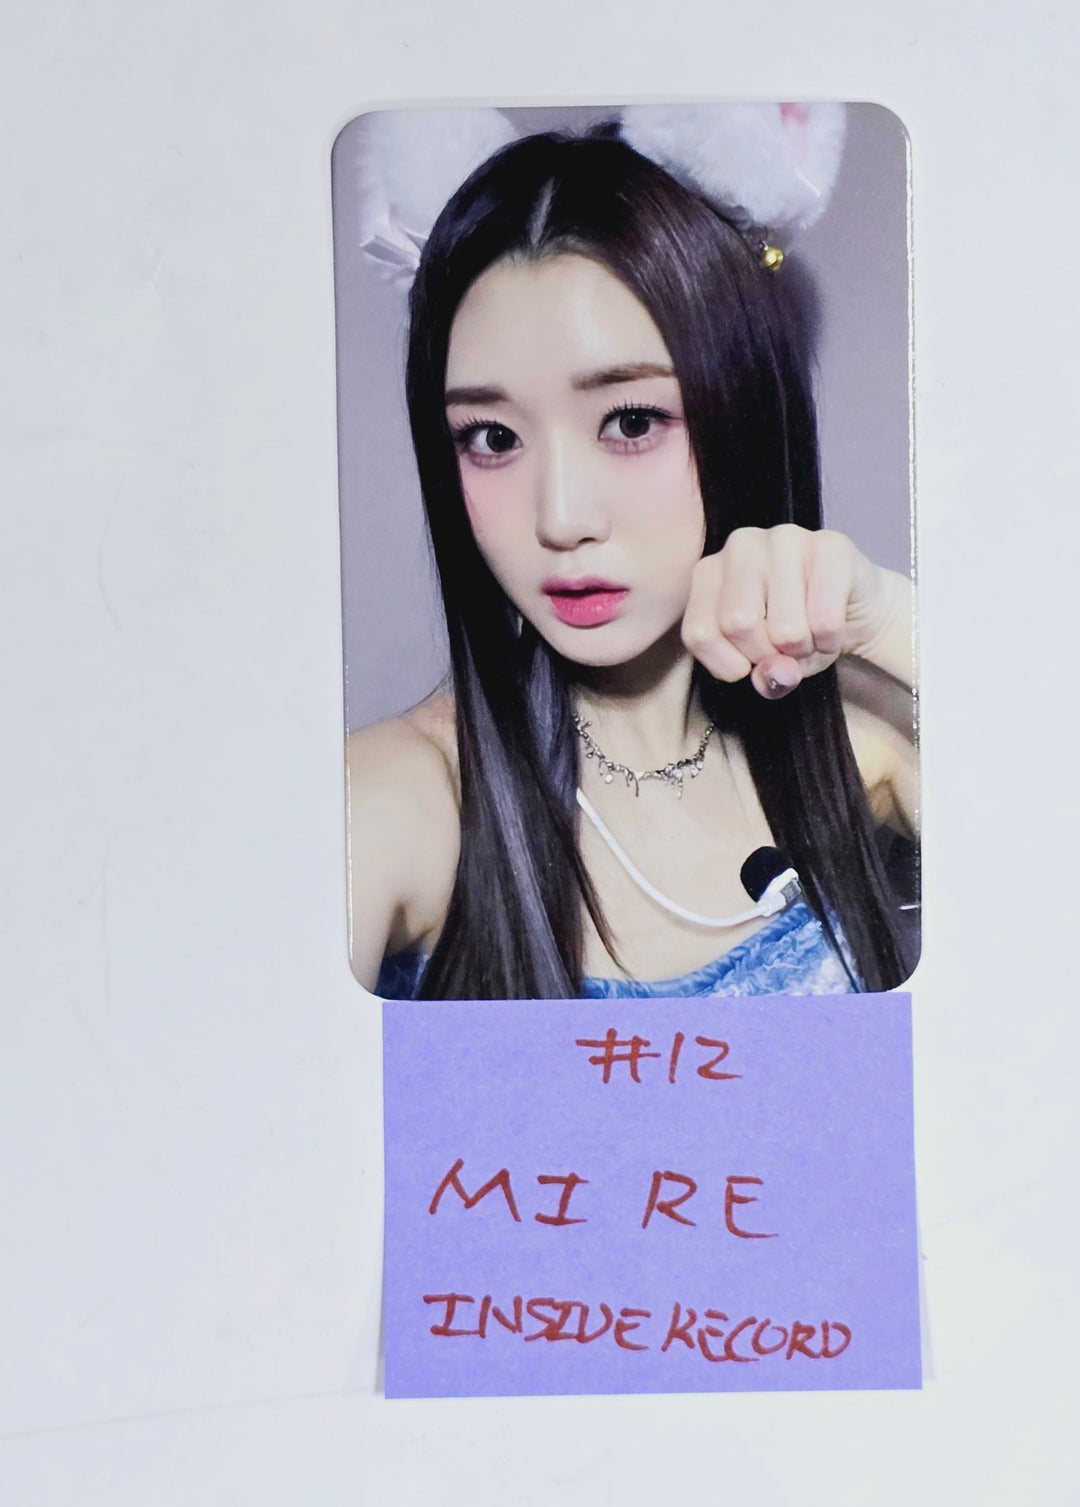 TRI.BE "Diamond" - Inside Record Fansign Event Photocard Round 2 [24.4.8]